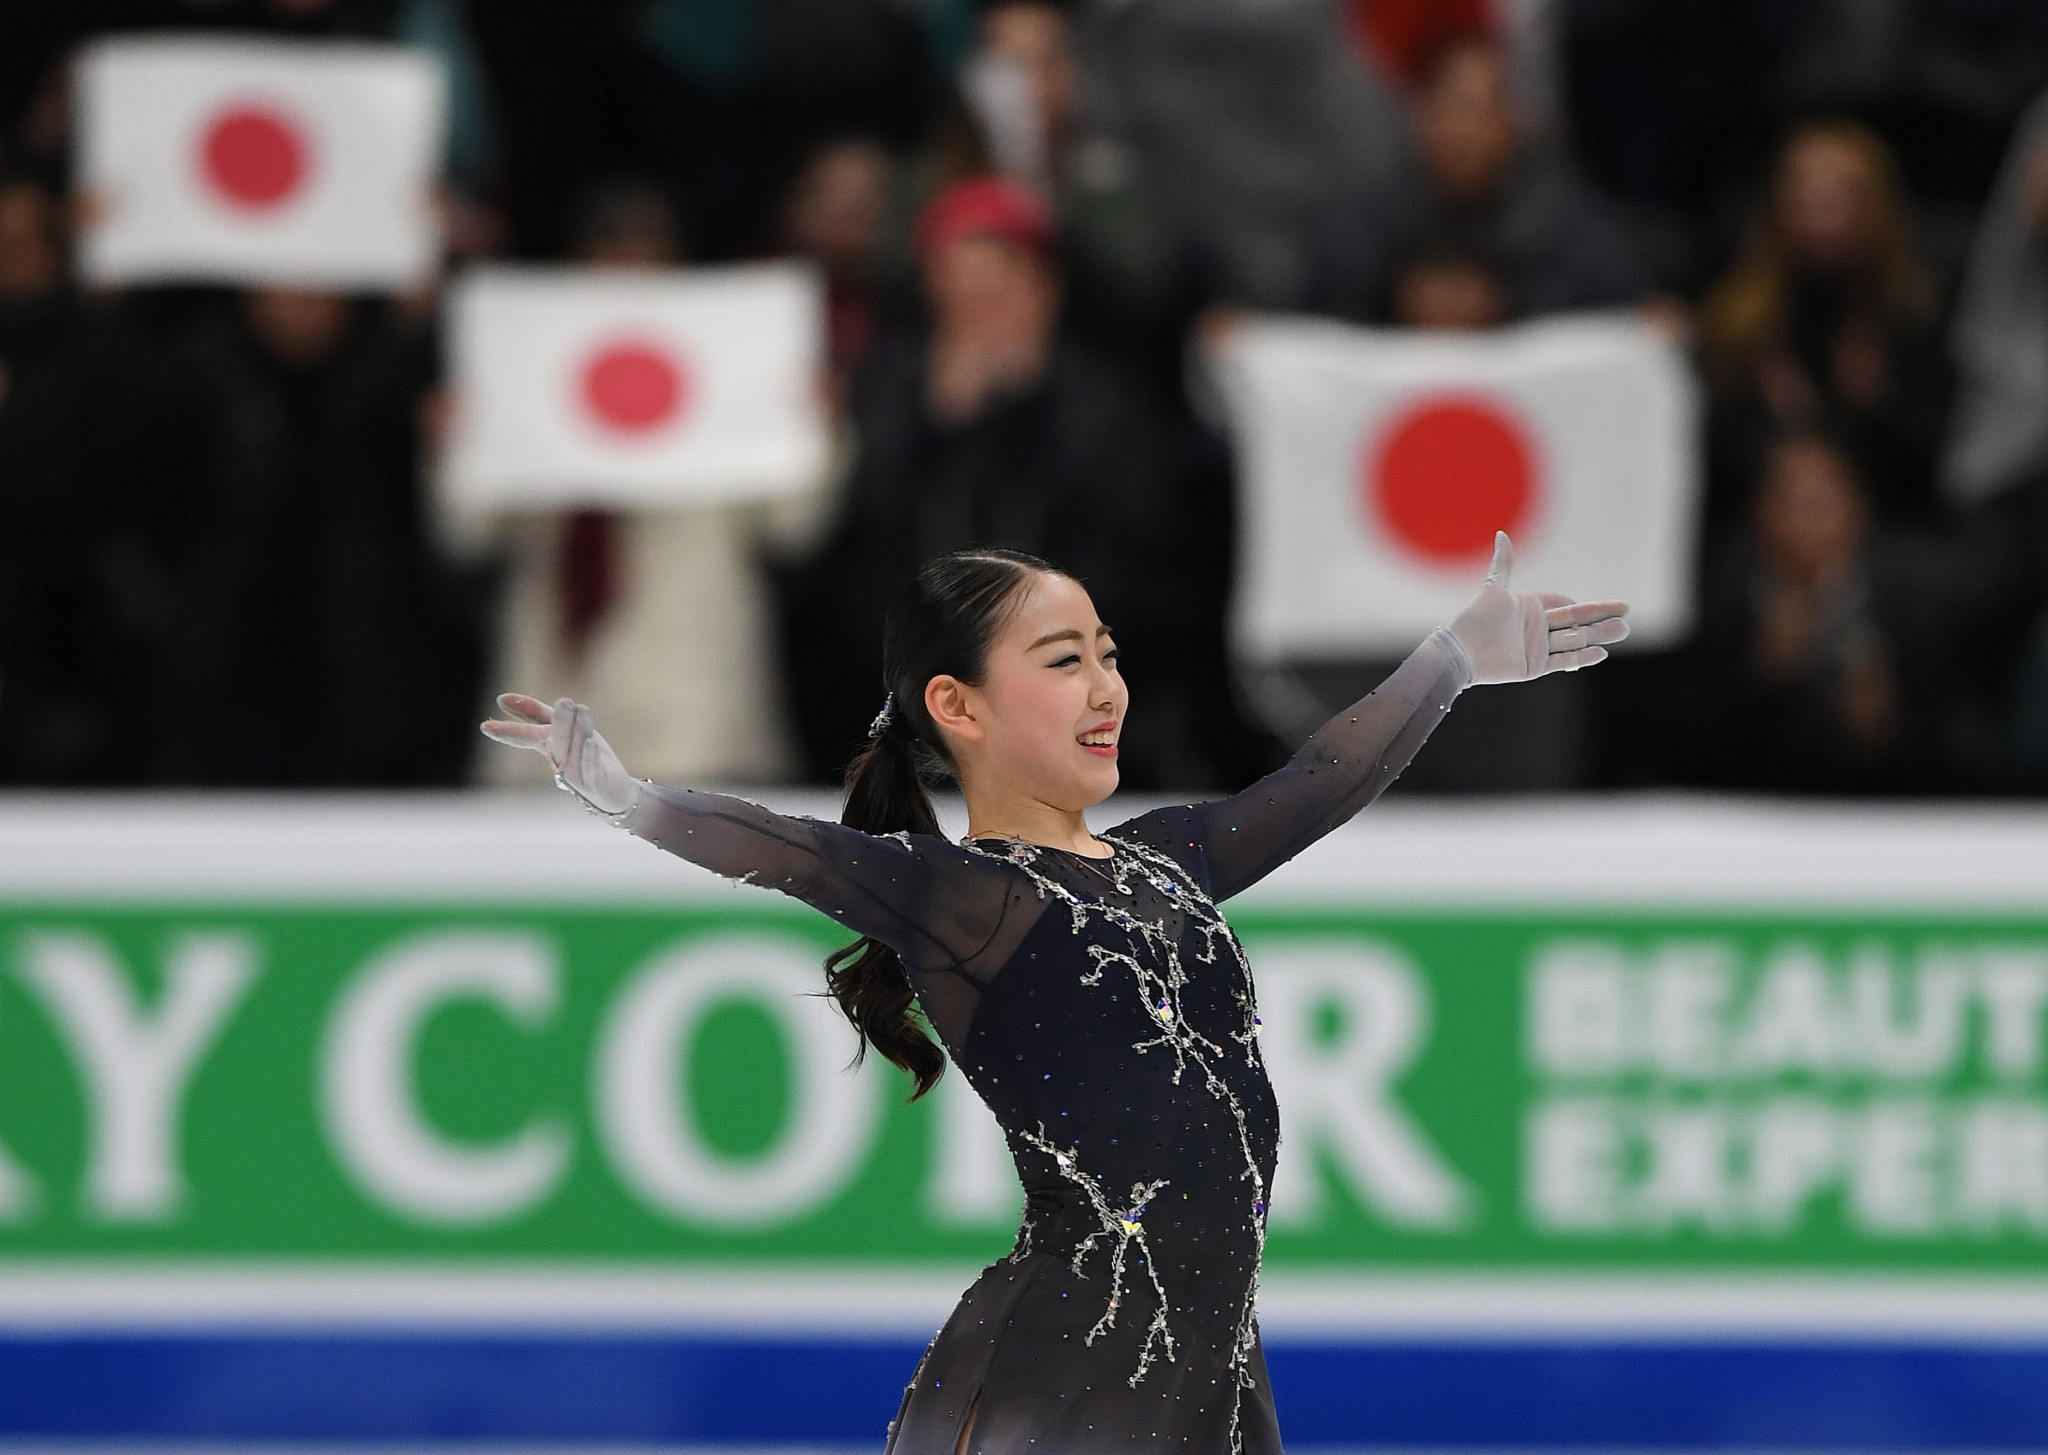 Rika Kihira claimed the ladies title at the ISU Four Continents Figure Skating Championships in Anaheim ©Getty Images